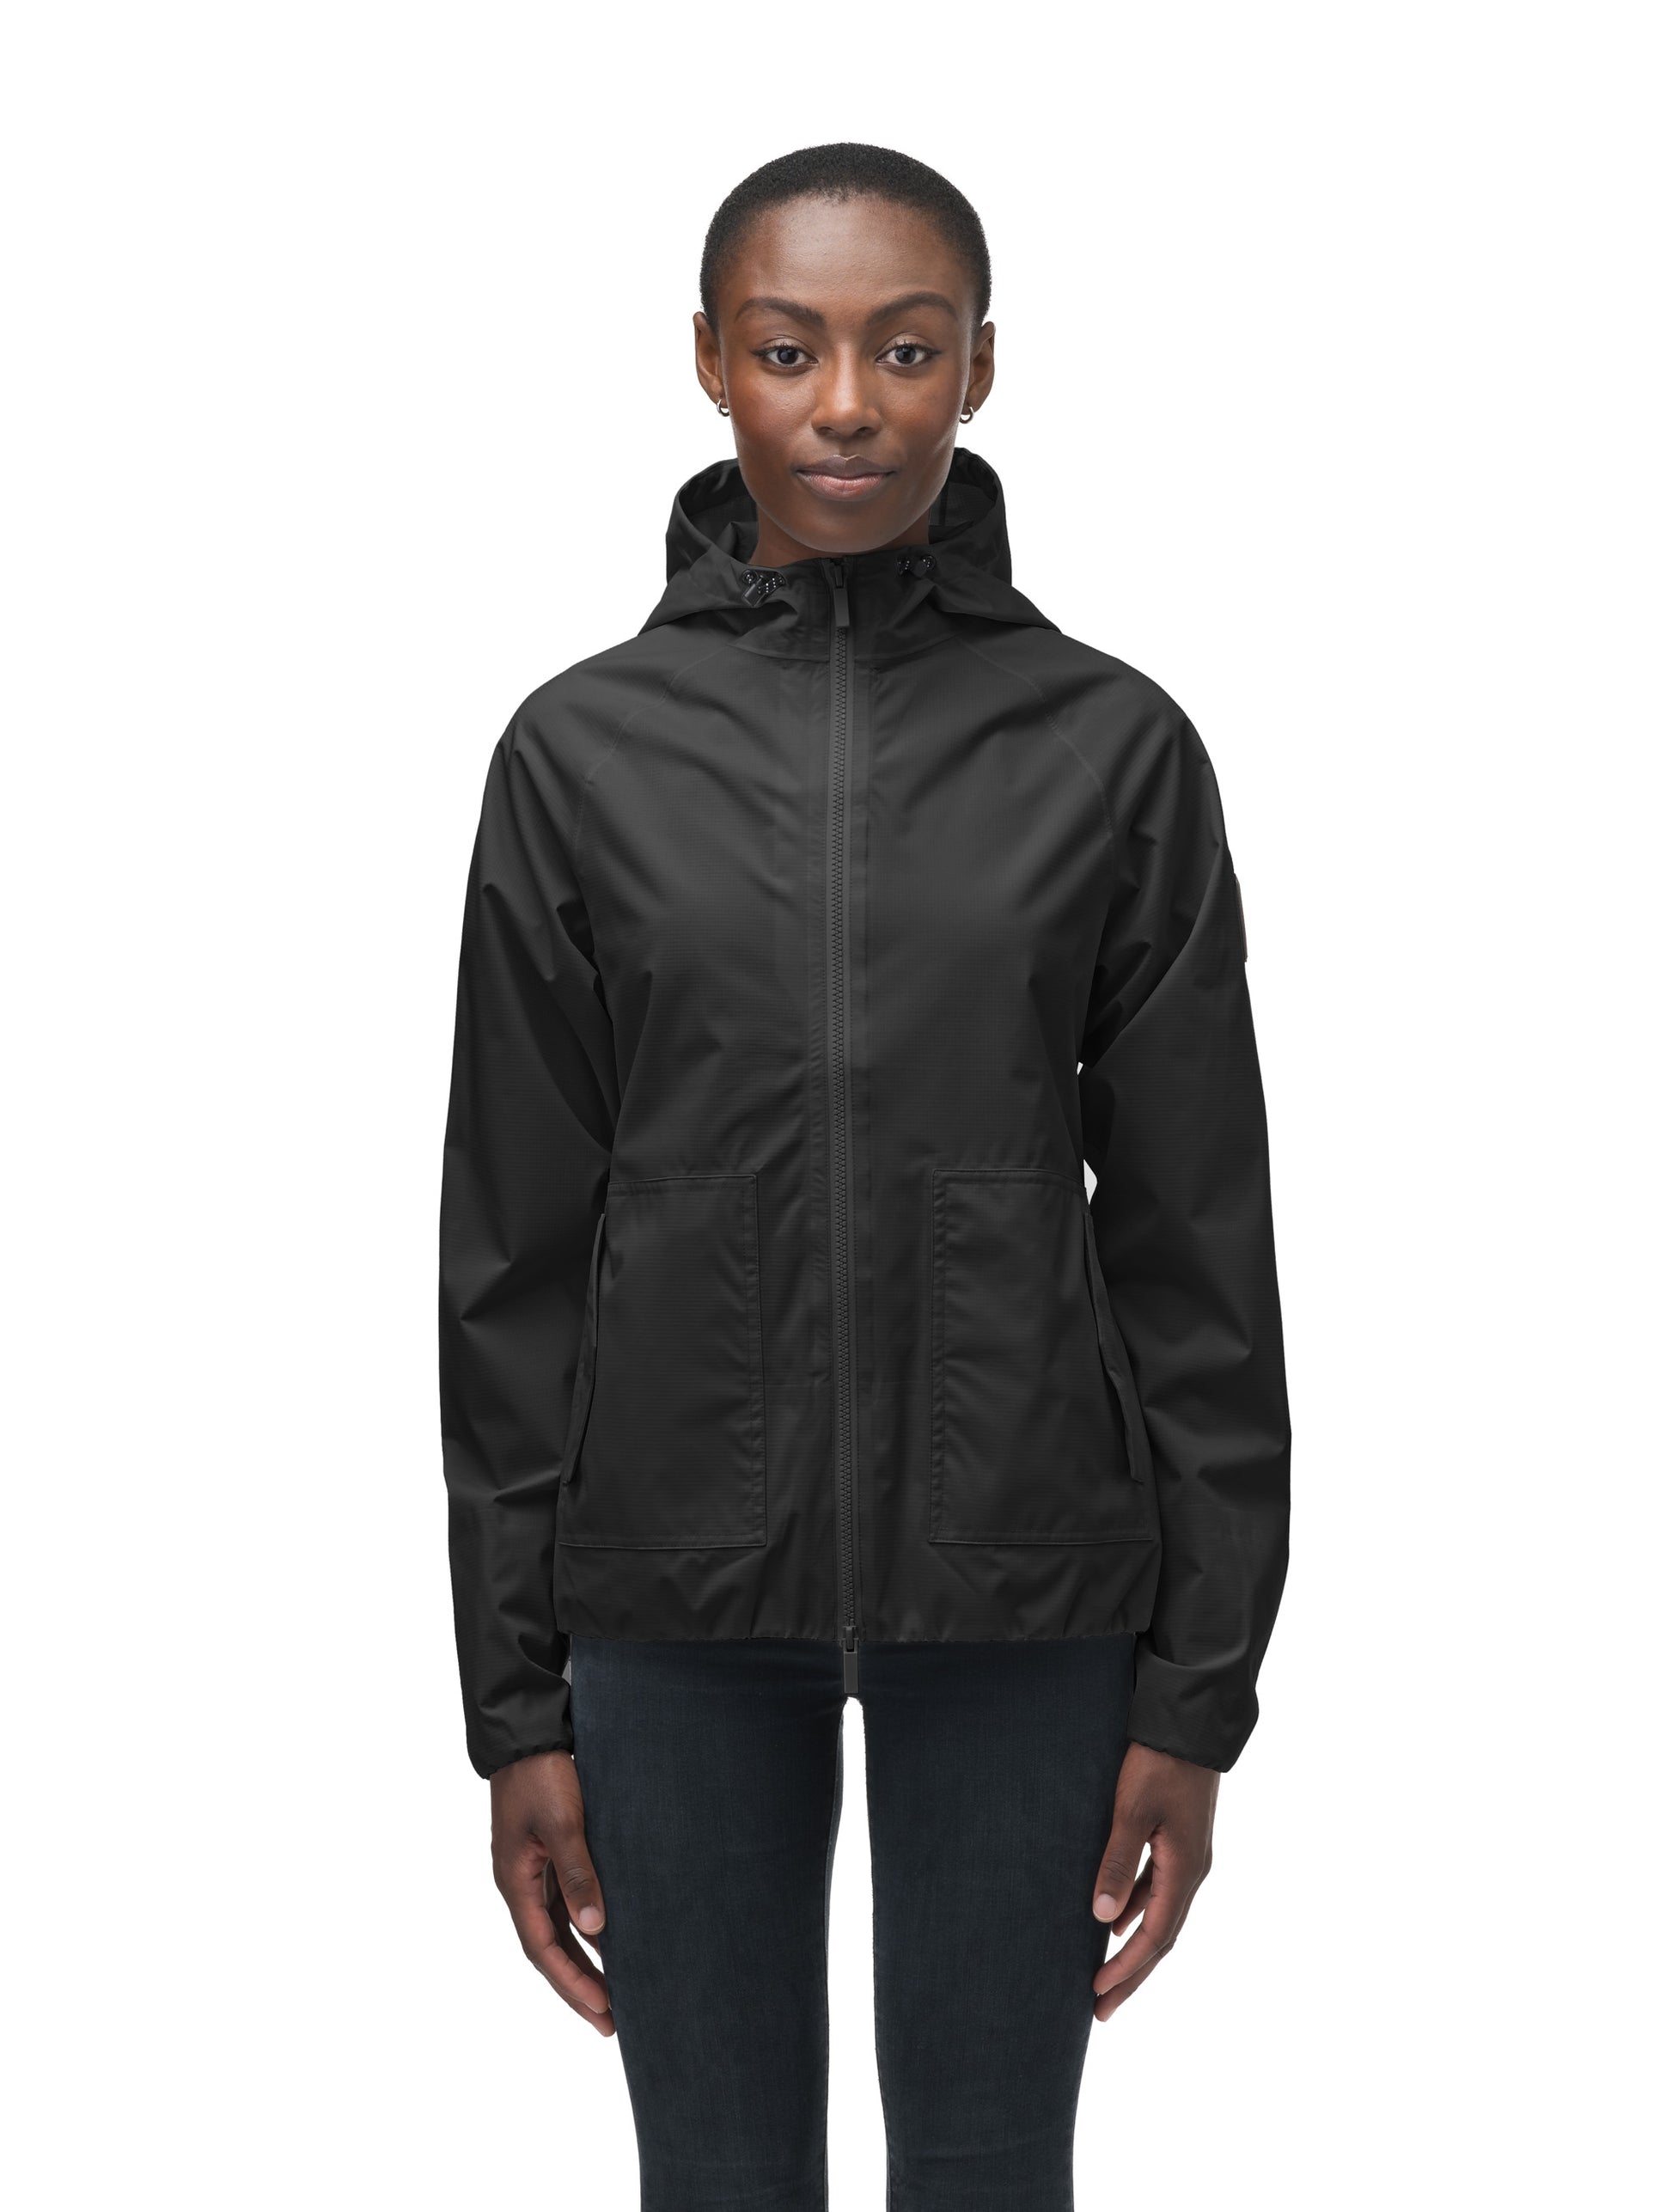 Women's hip length waterproof jacket with non-removable hood and two-way zipper in Black